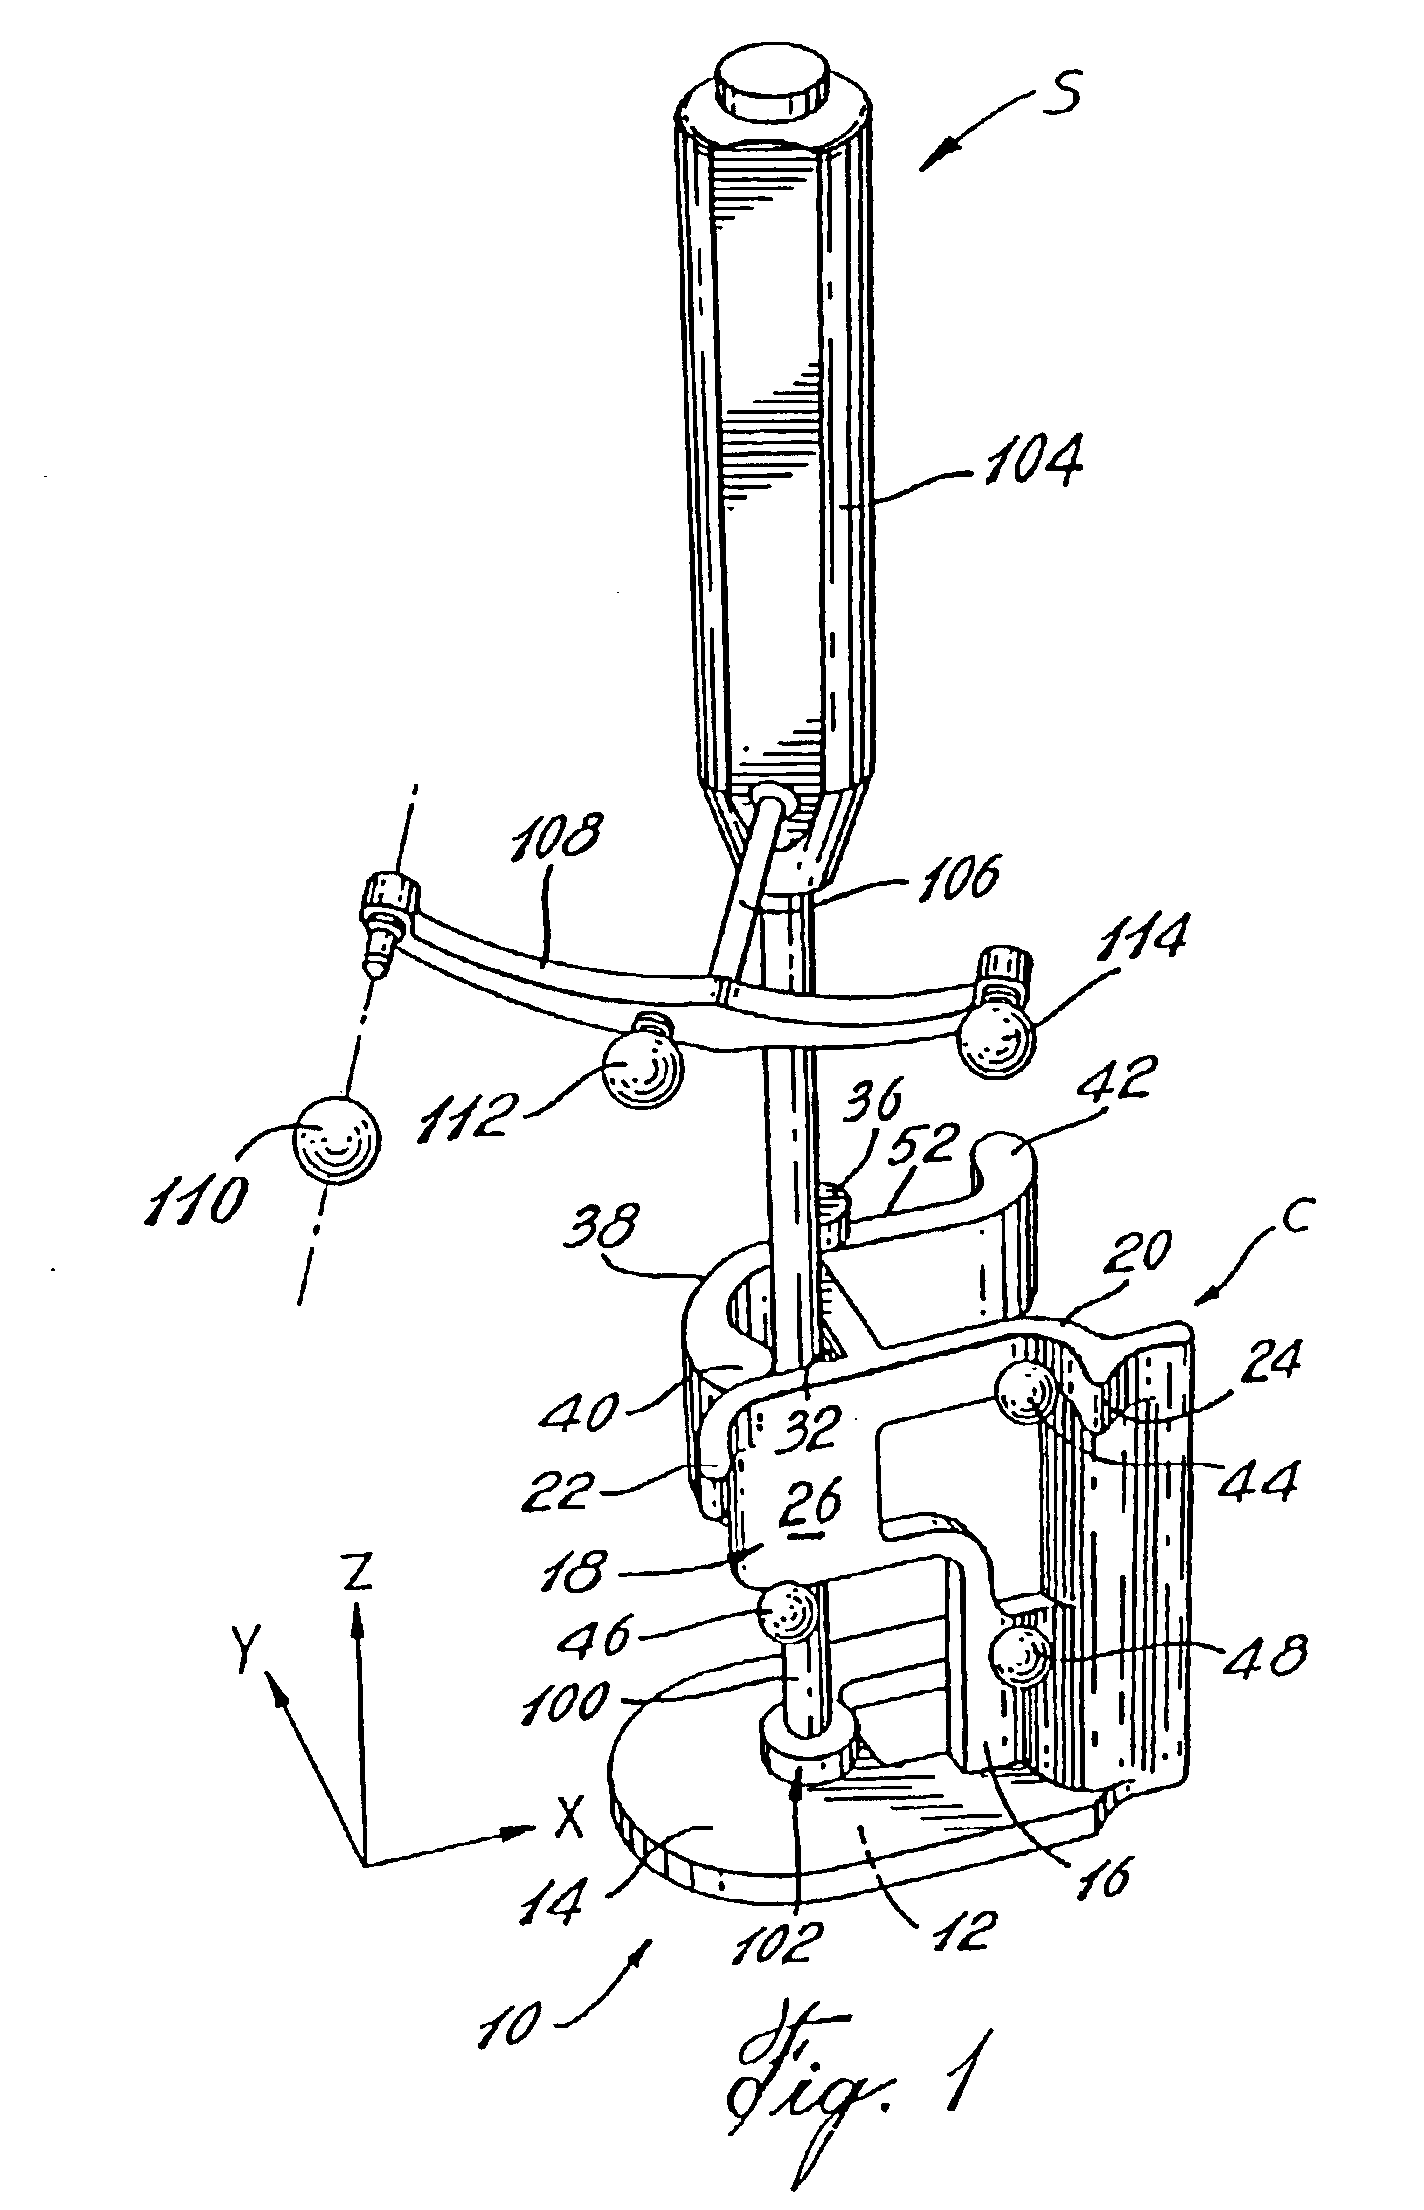 Automatic calibration system for computer-aided surgical instruments